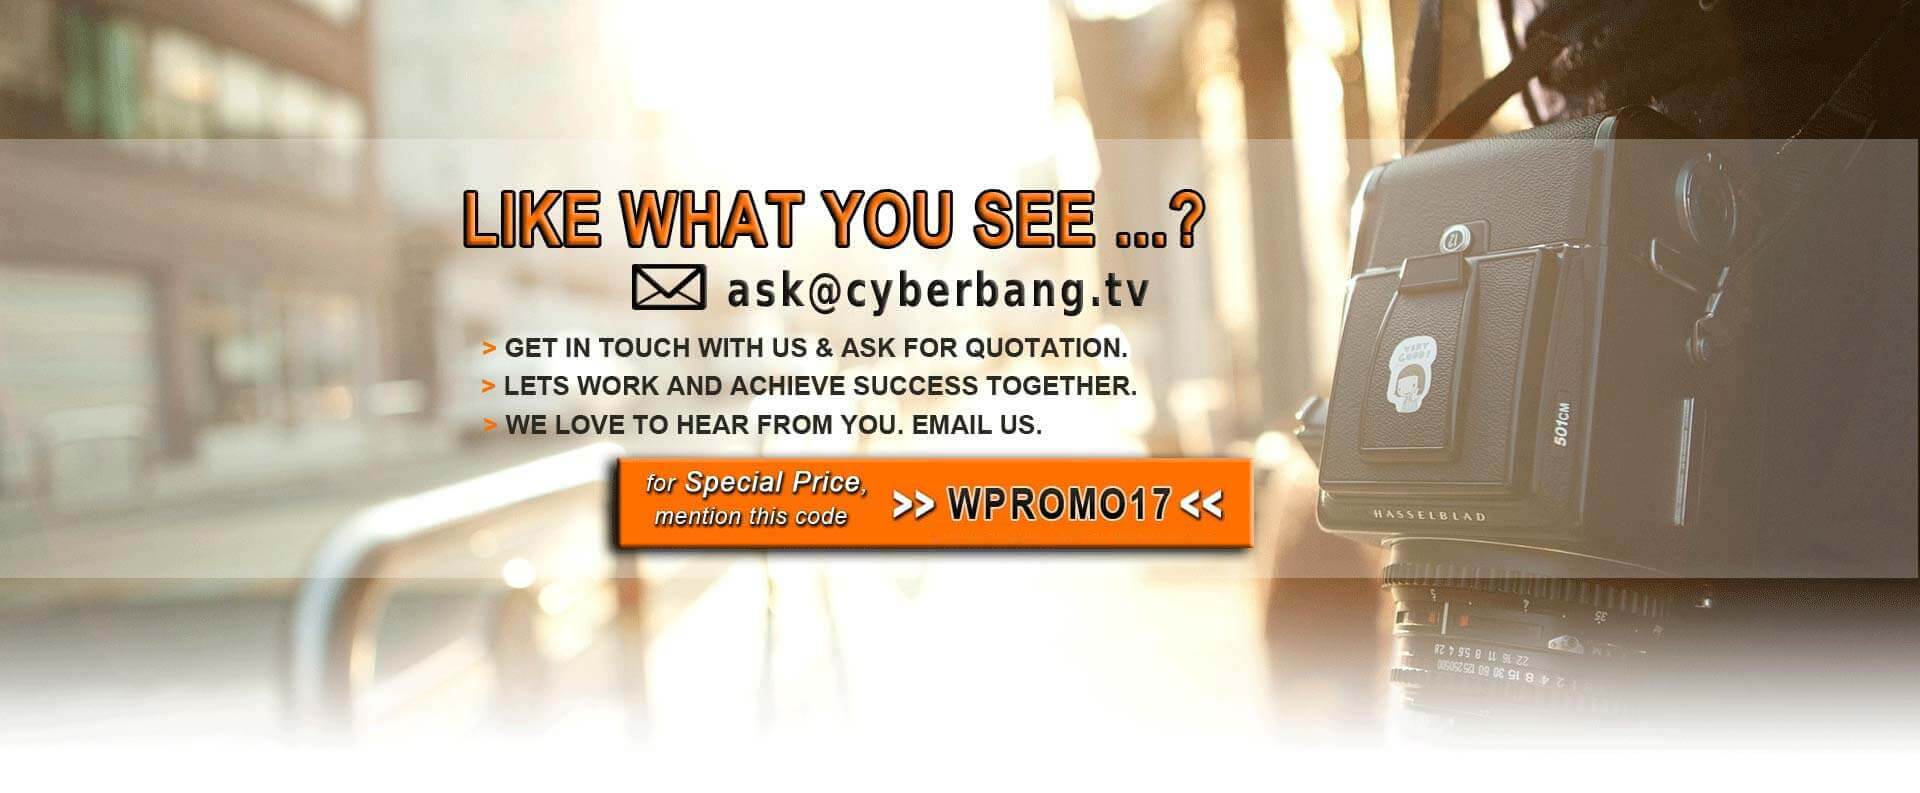 ask-for-quotation-cyberbang